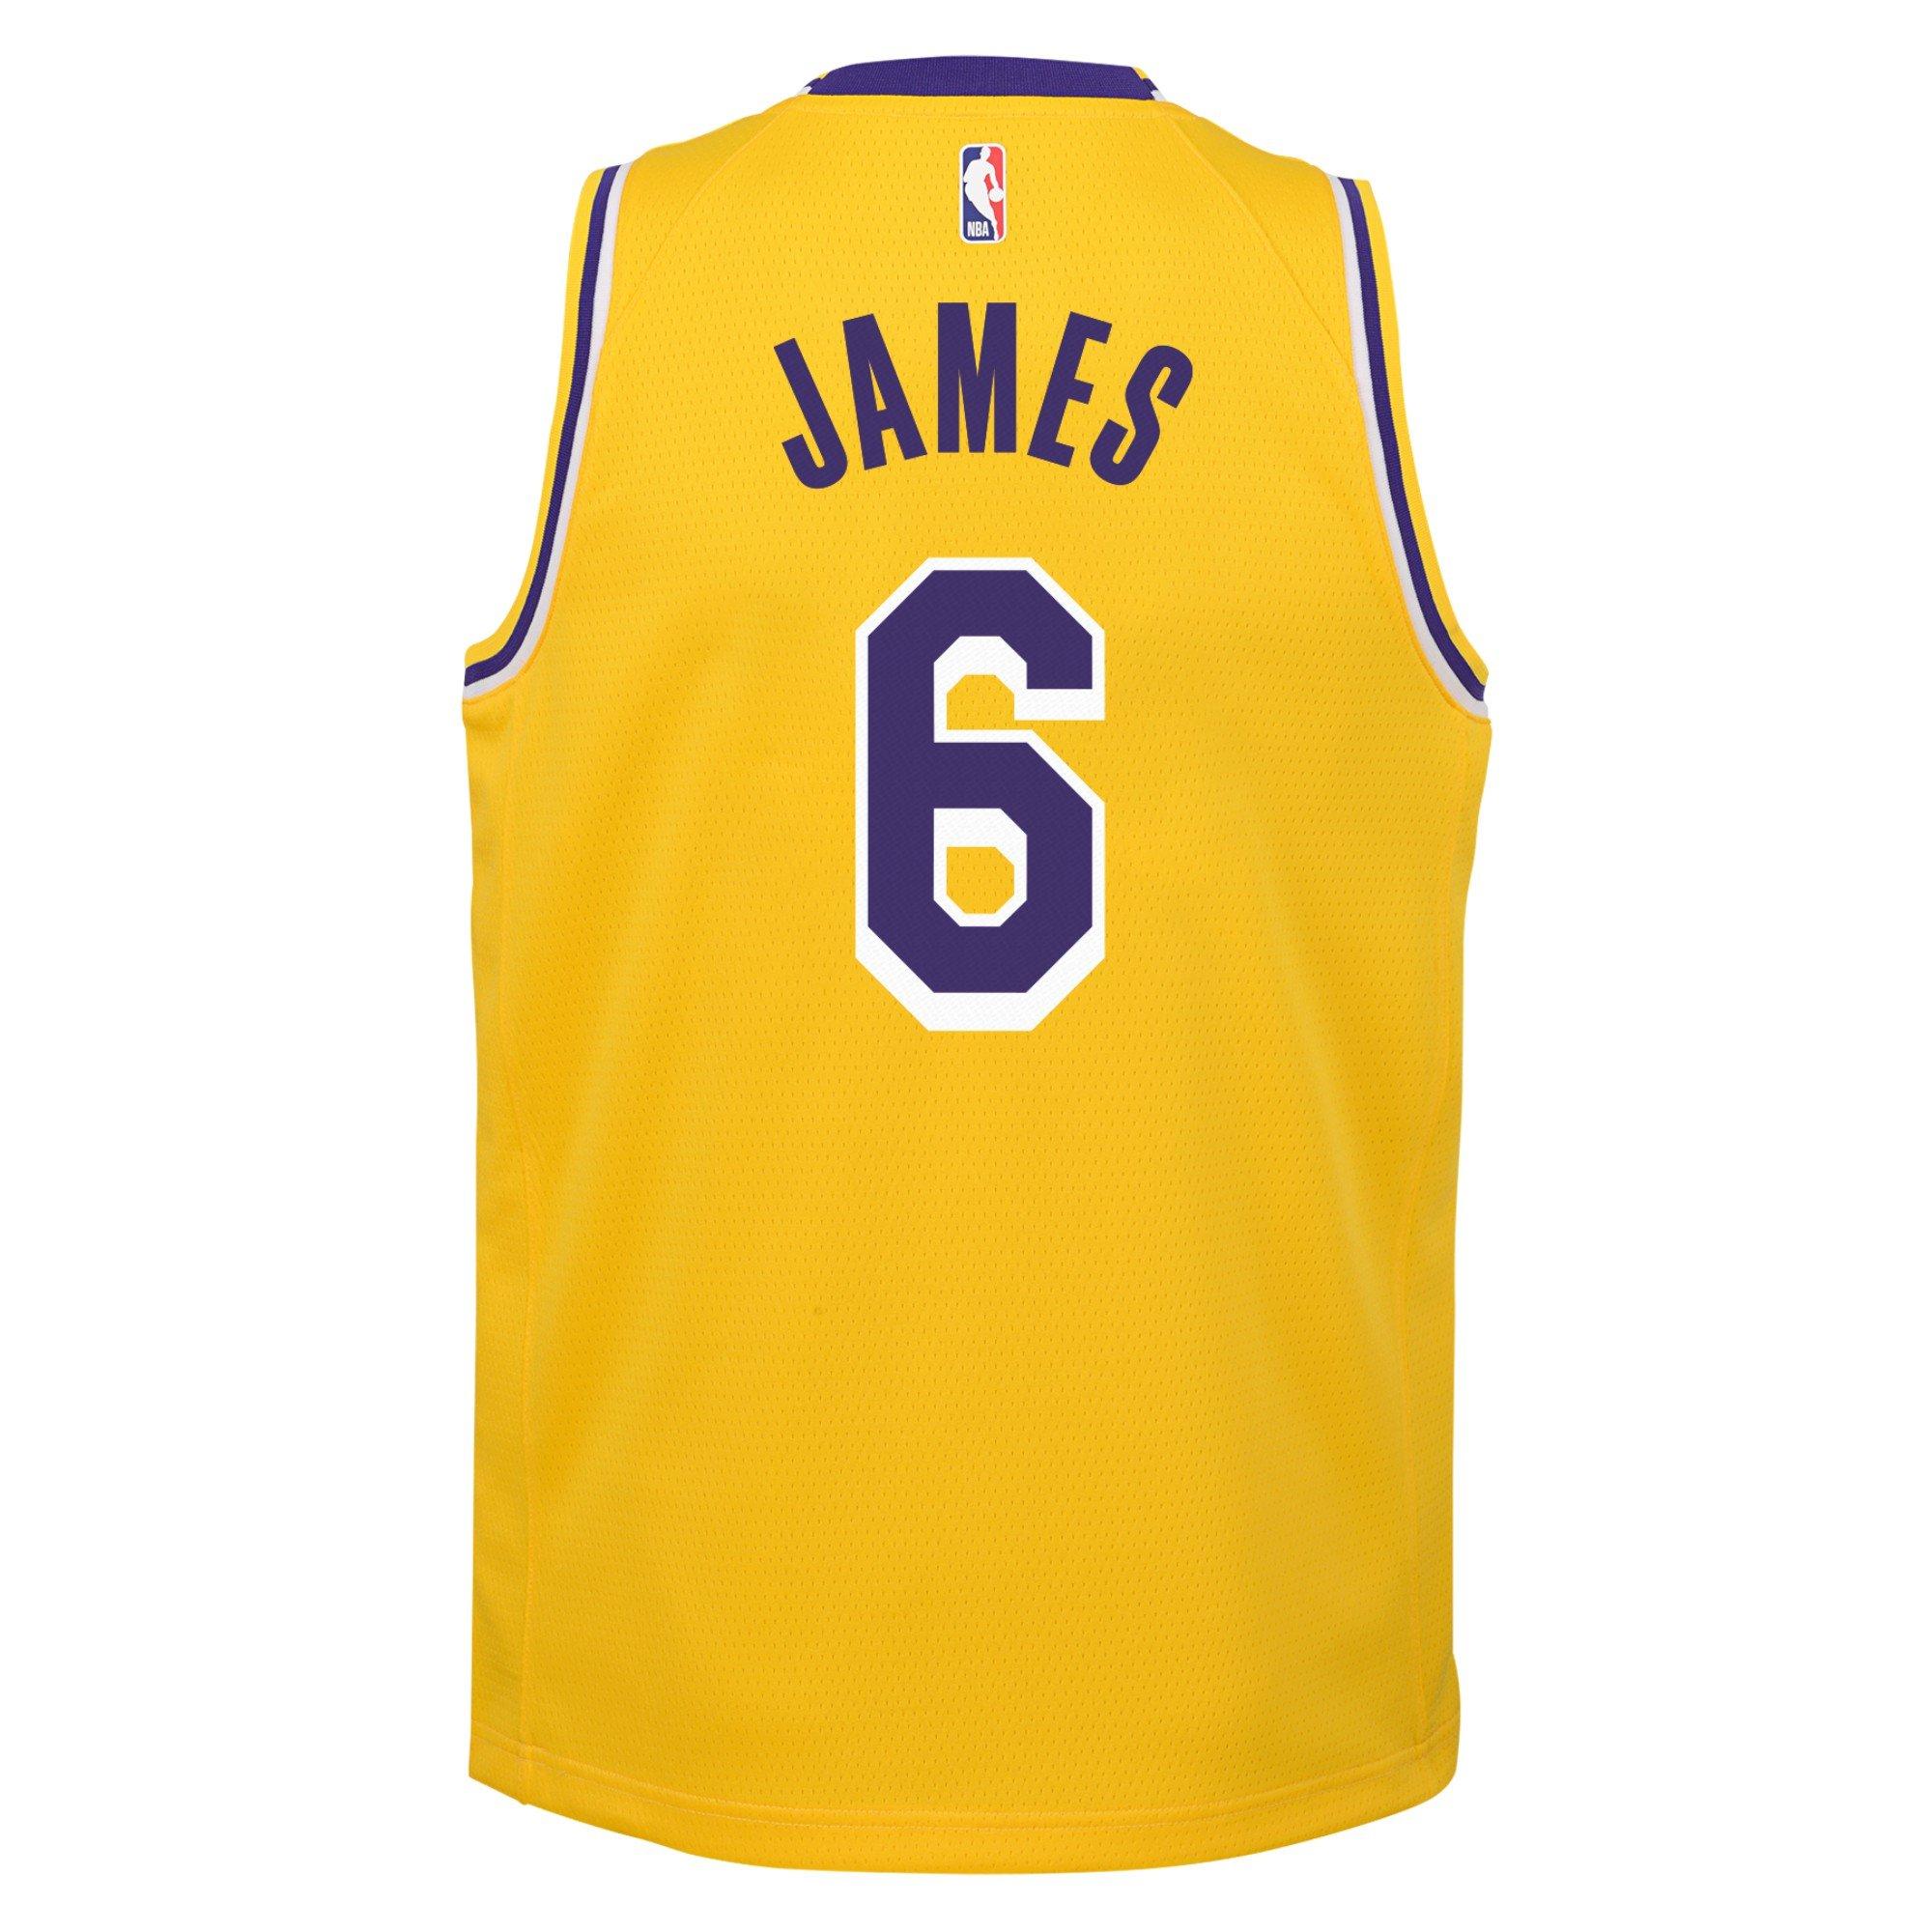 youth lebron james lakers jersey